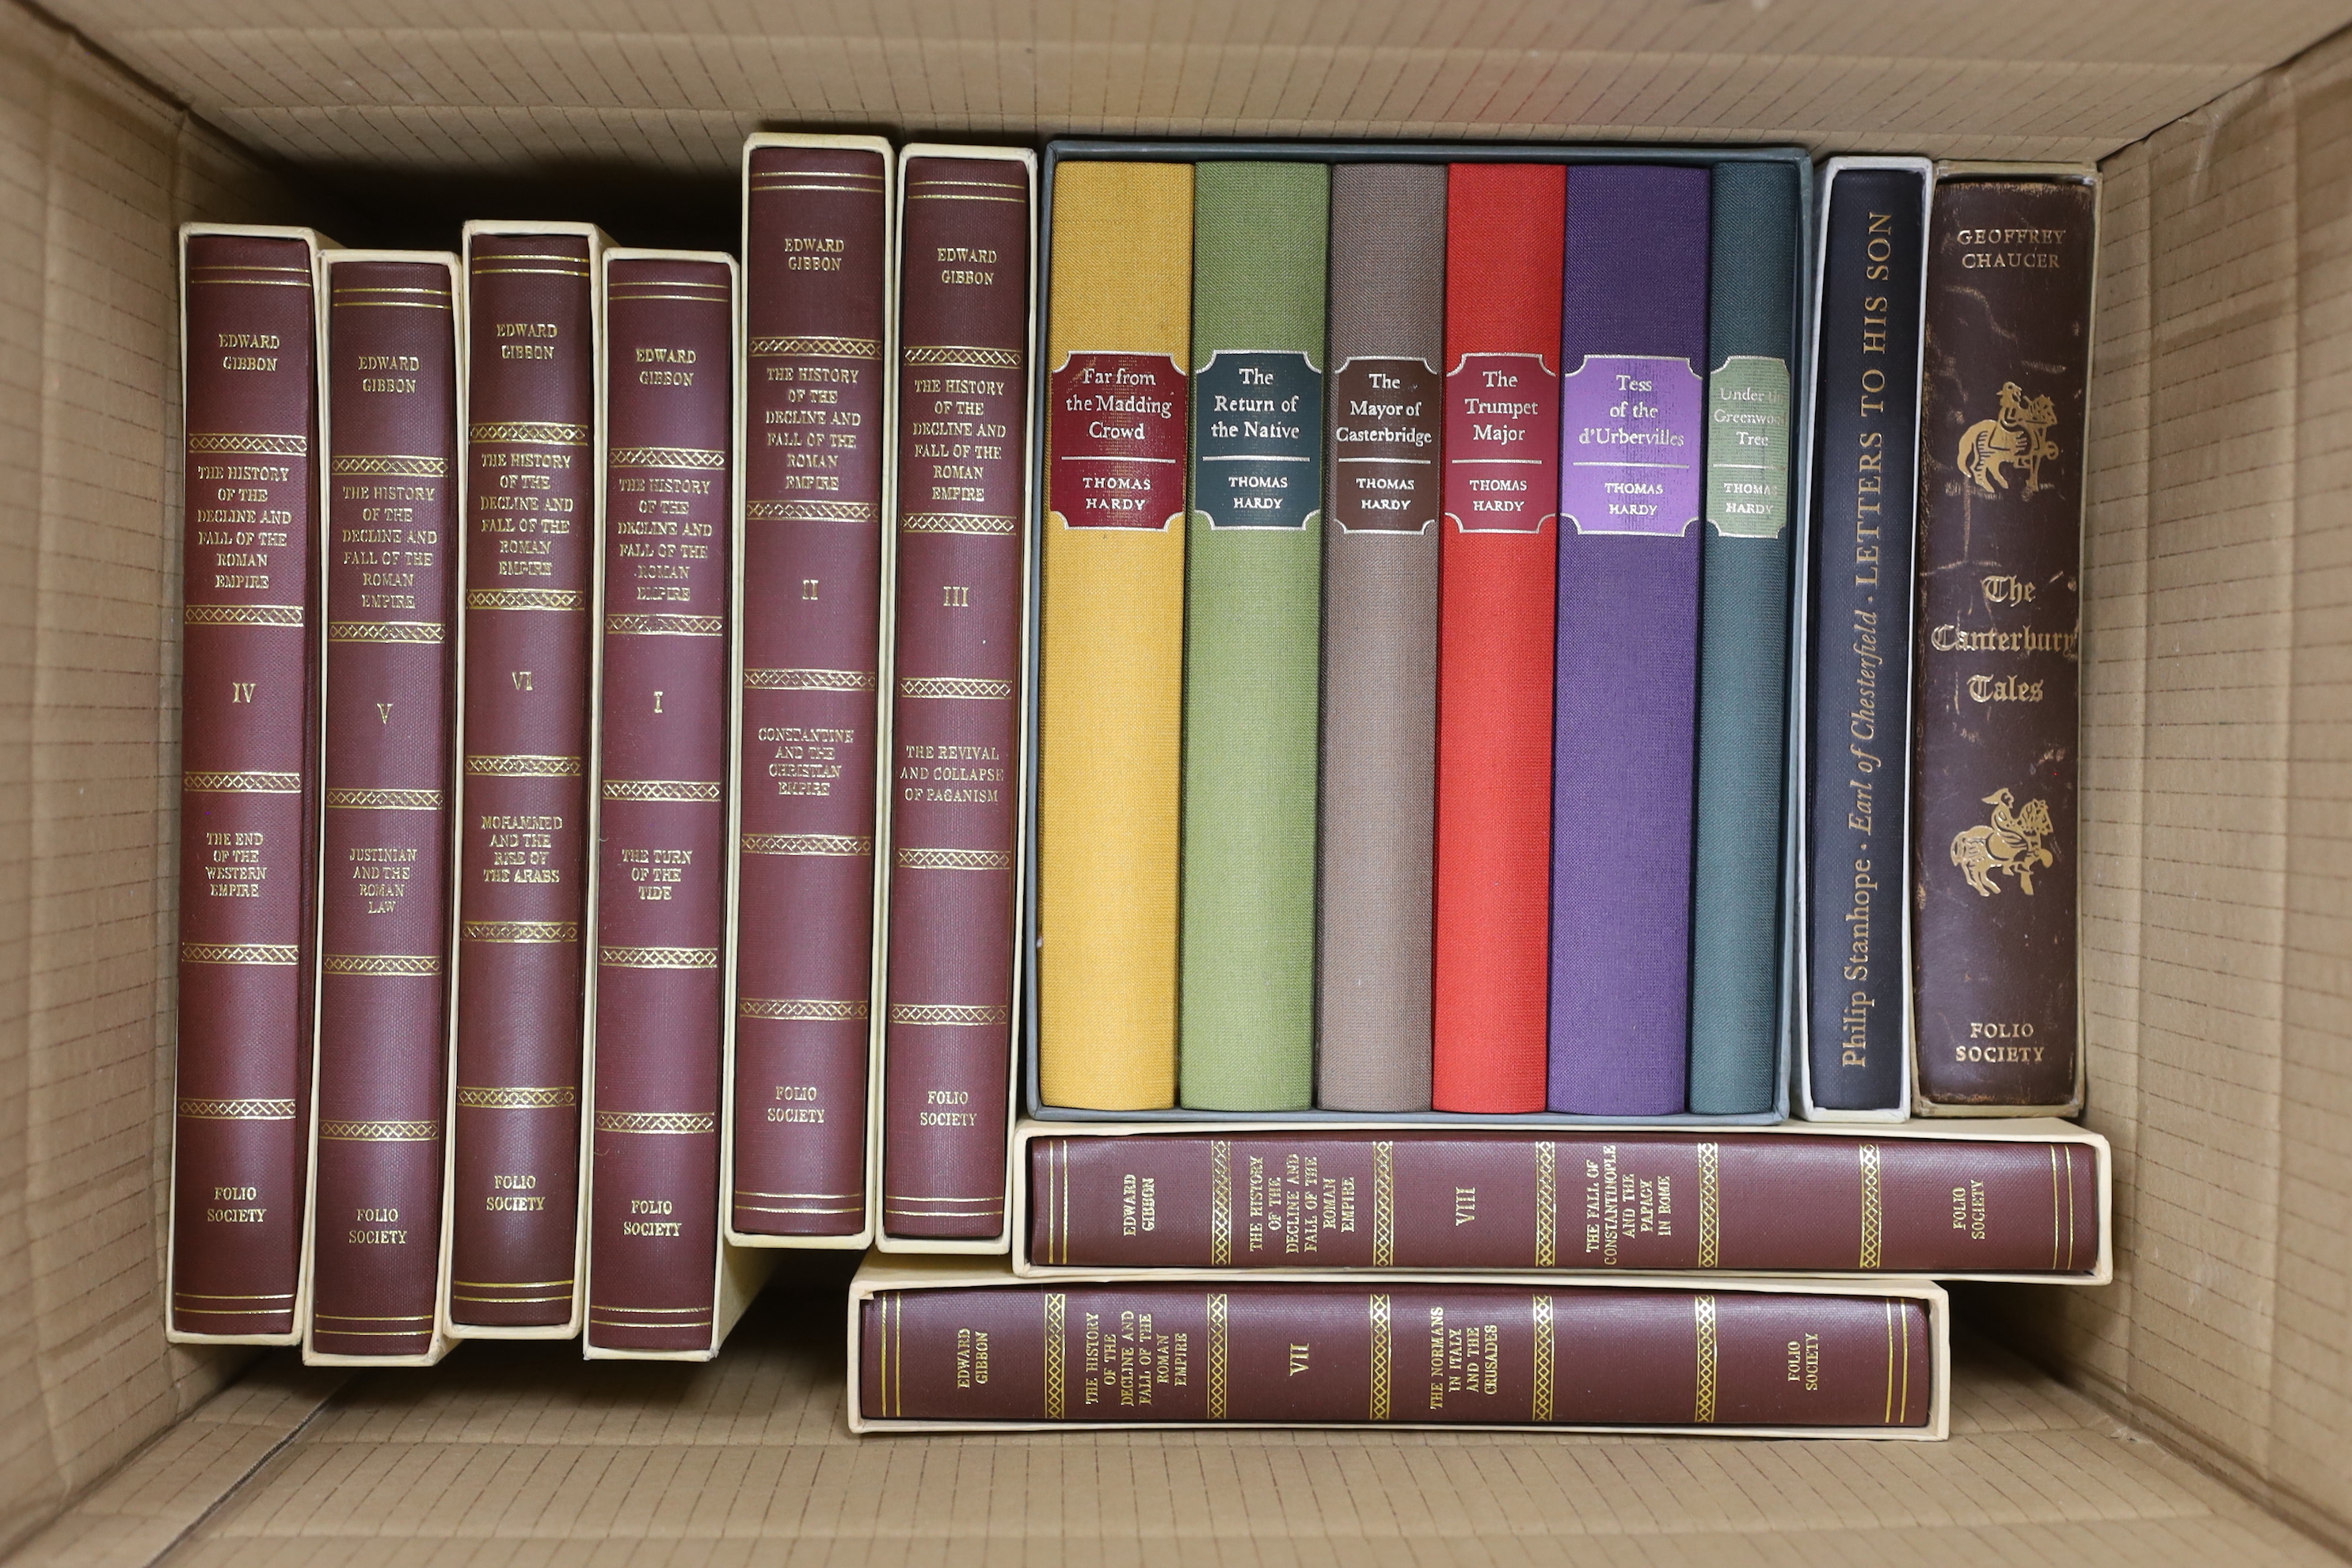 A quantity of Folio Society books in slip cases including ‘The book of the thousand nights and one night’, volumes I-IV and ‘The history of the decline and fall of the Roman Empire’, volumes I-VIII